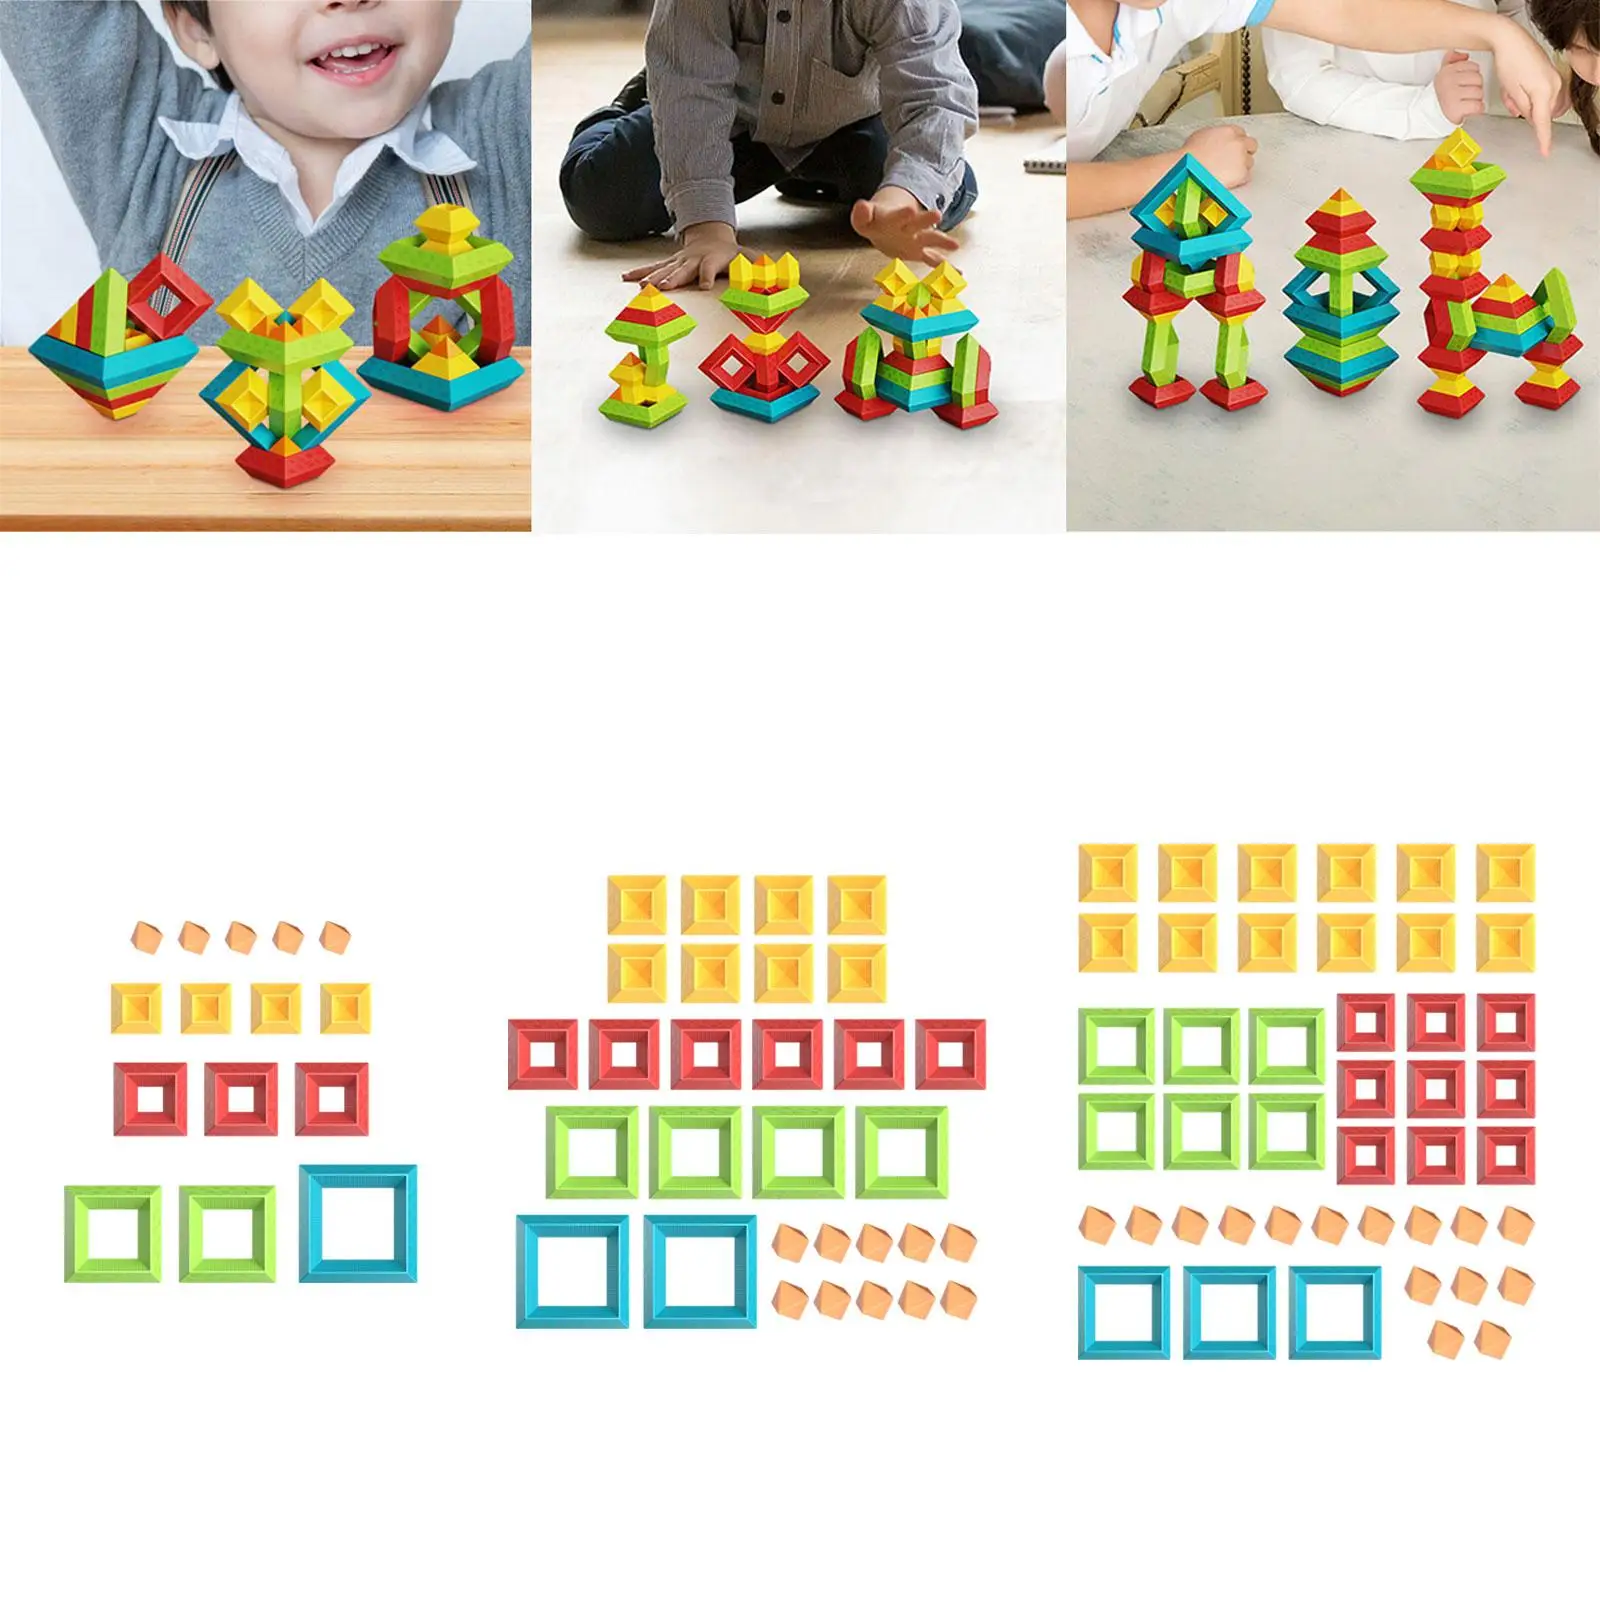 3D Pyramid Building Blocks, Geometric Stacking Toys for Kids, Creative Early Childhood STEM Educational Toys for Preschool